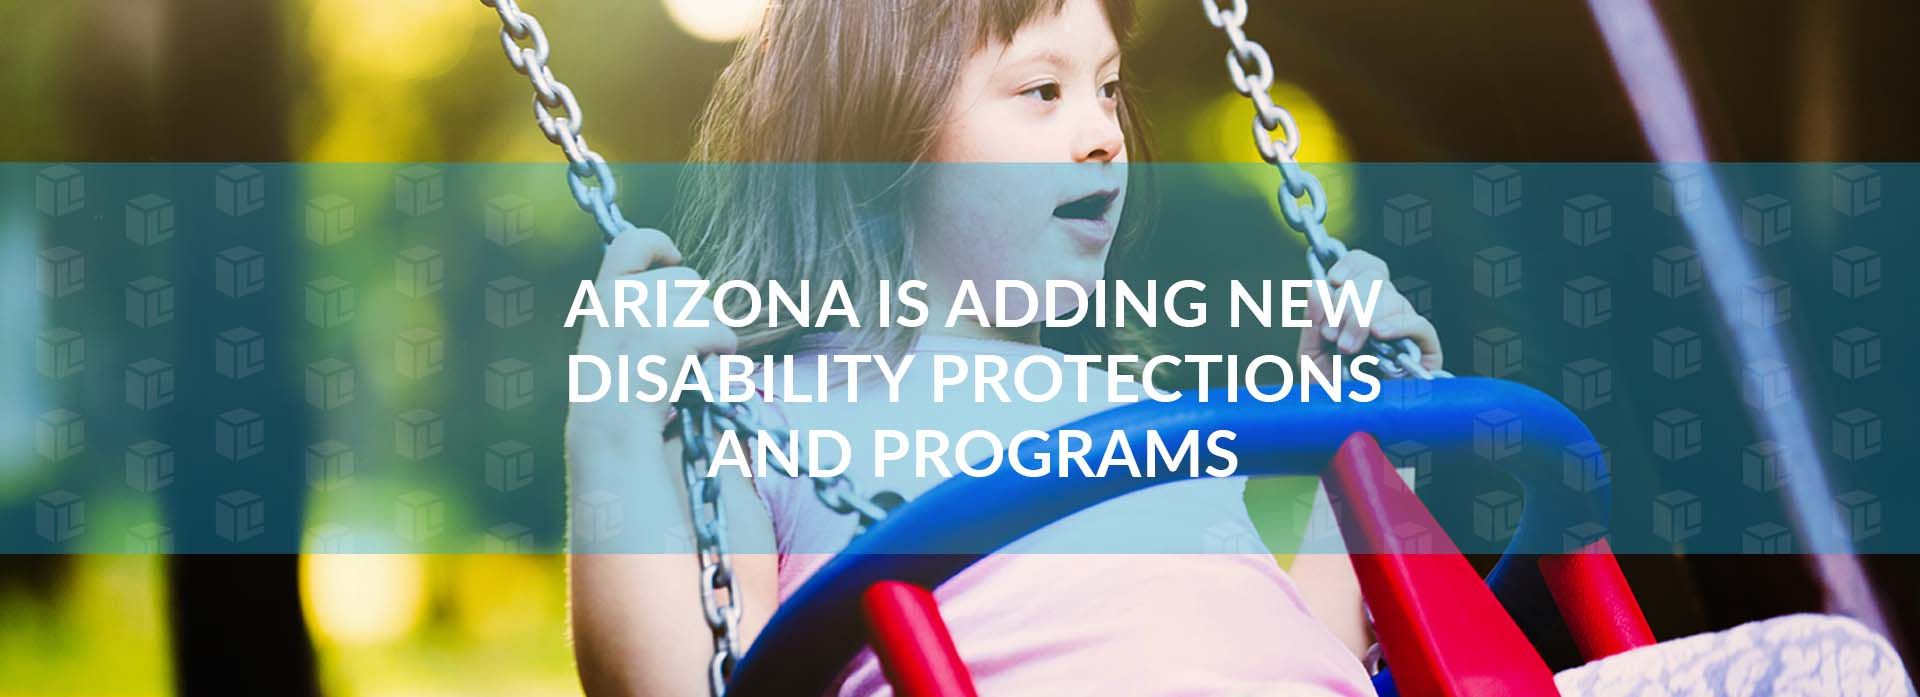 Arizona Is Adding New Disability Protections And Programs Arizona Is Adding New Disability Protections And Programs Arizona Is Adding New Disability Protections And Programs Arizona Is Adding New Disability Protections And Programs